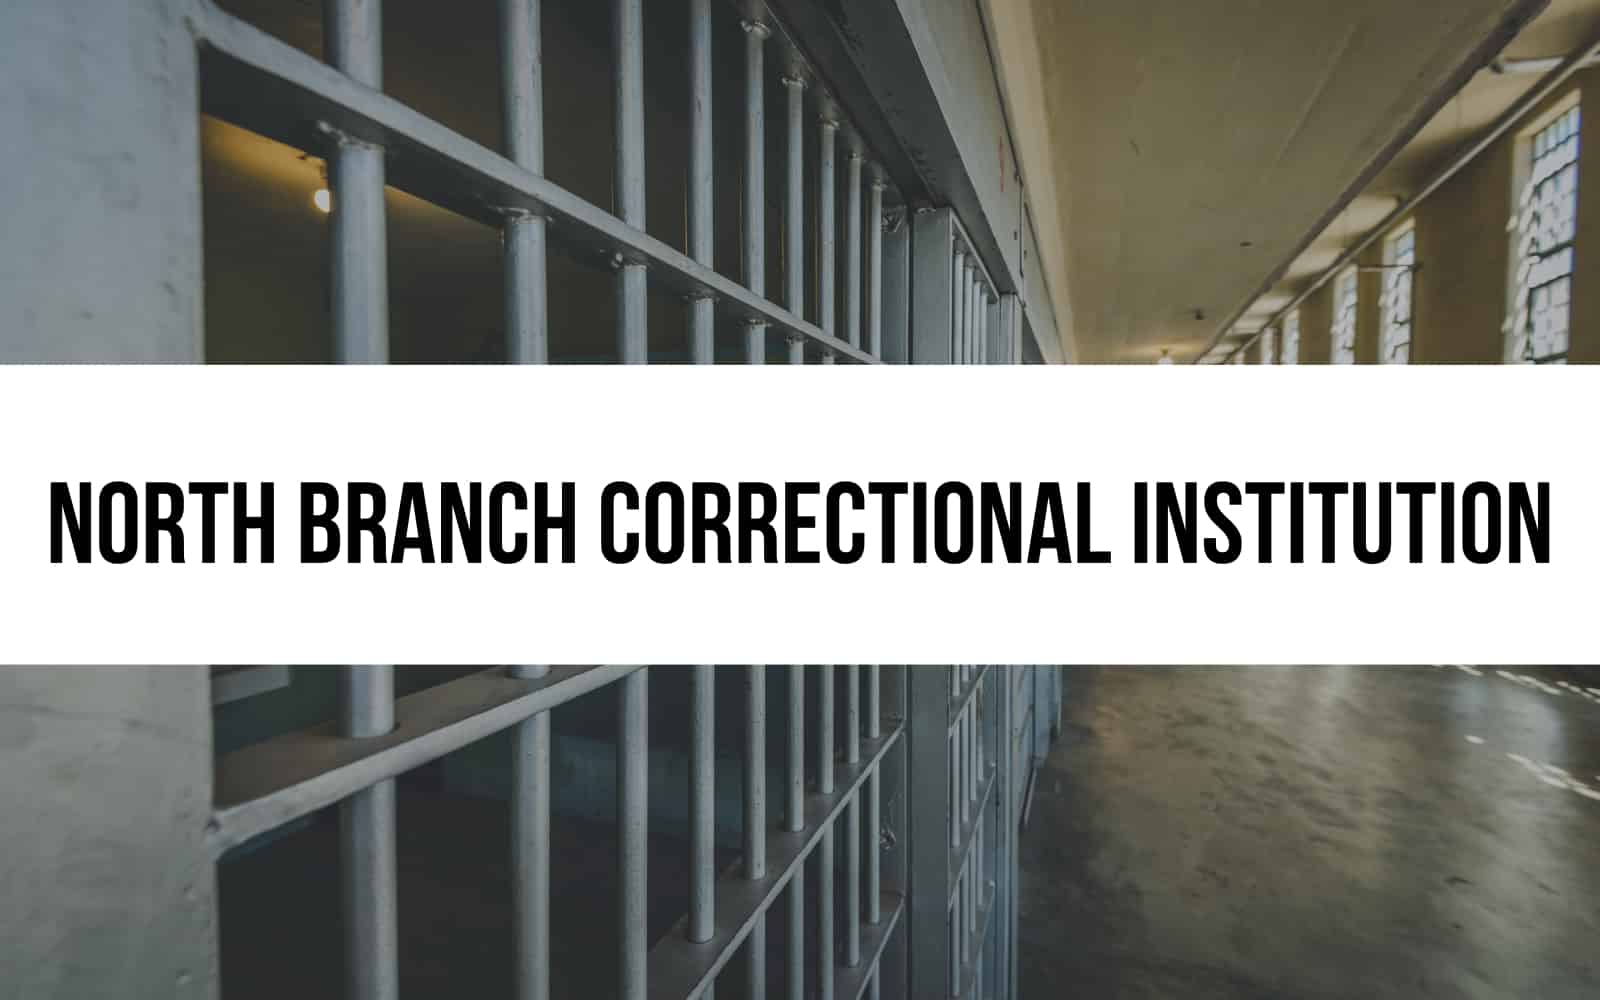 North Branch Correctional Institution